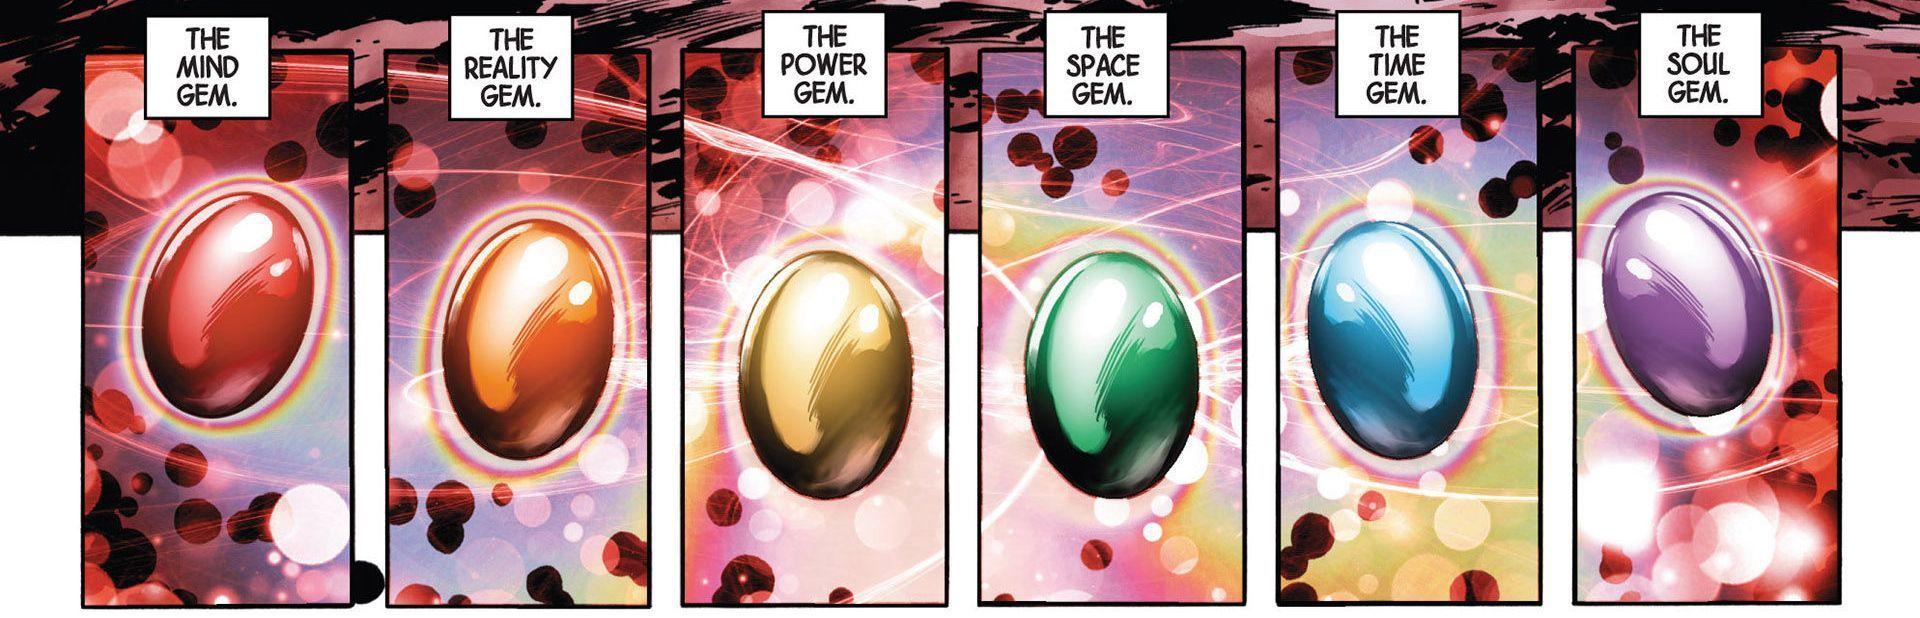 Things About Marvel's Infinity Stones You Didn't Know